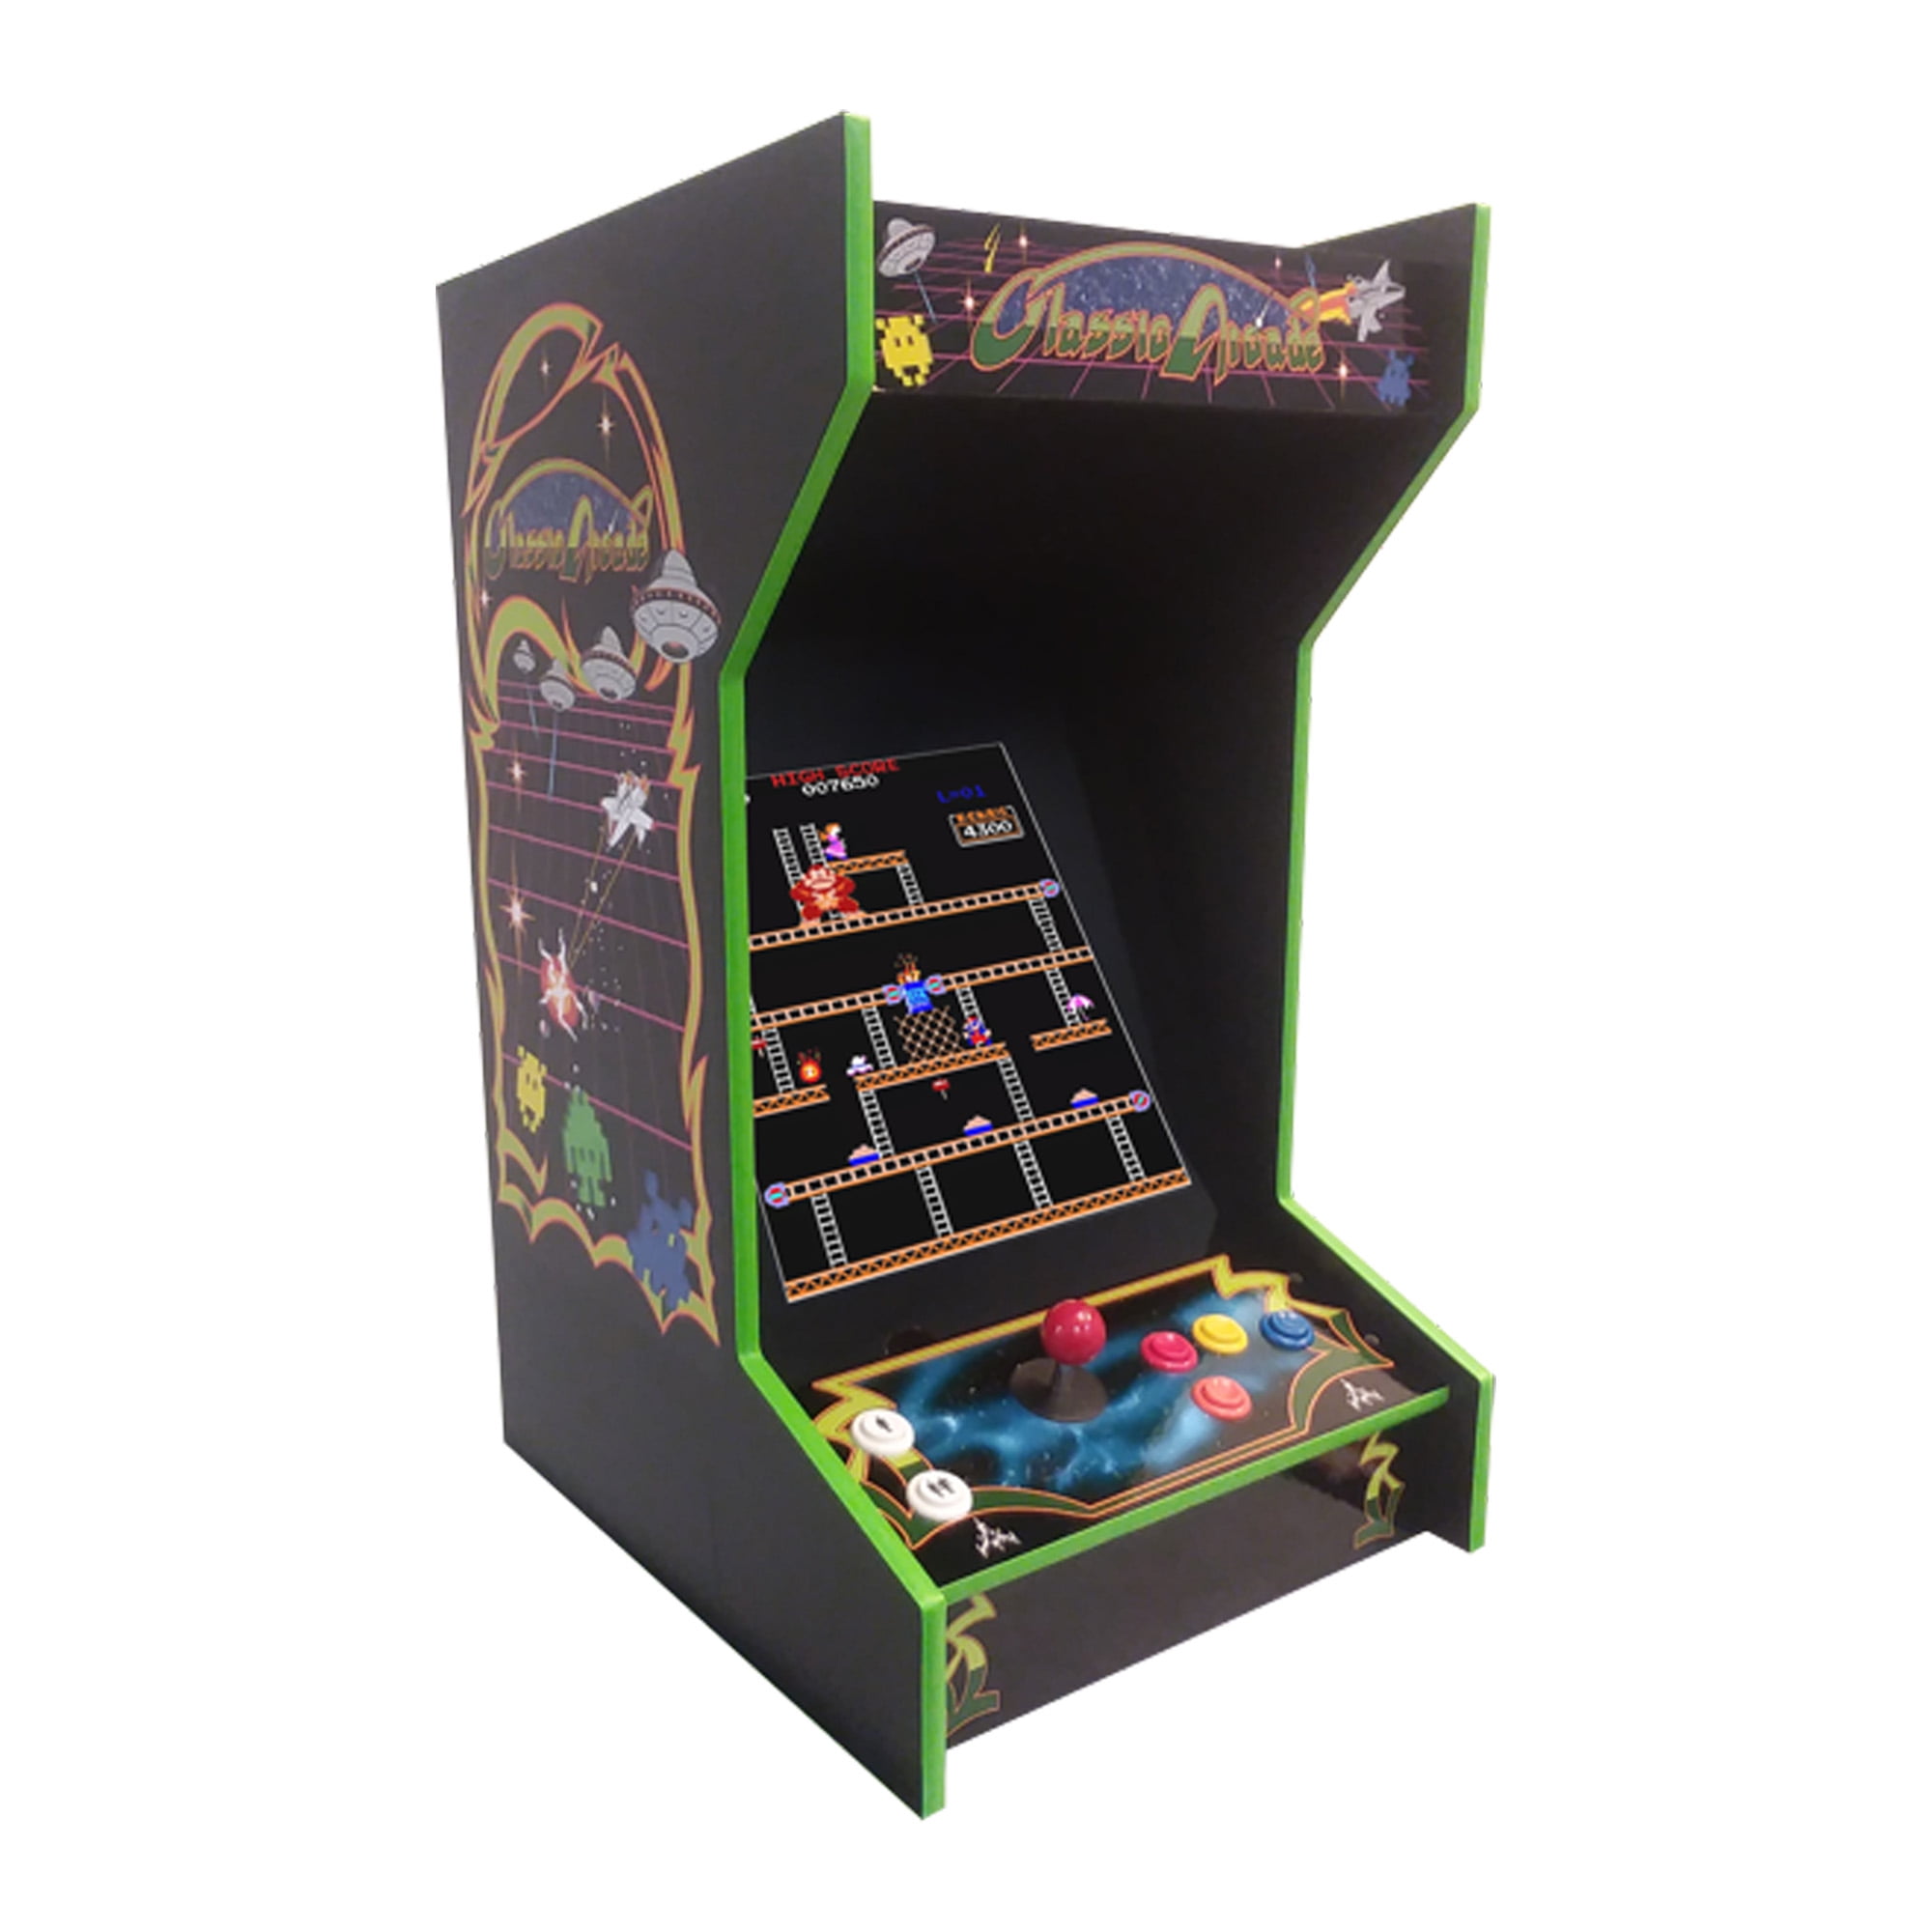 New style video game console mini arcade machine 412in 1 games for Family 10"LCD 